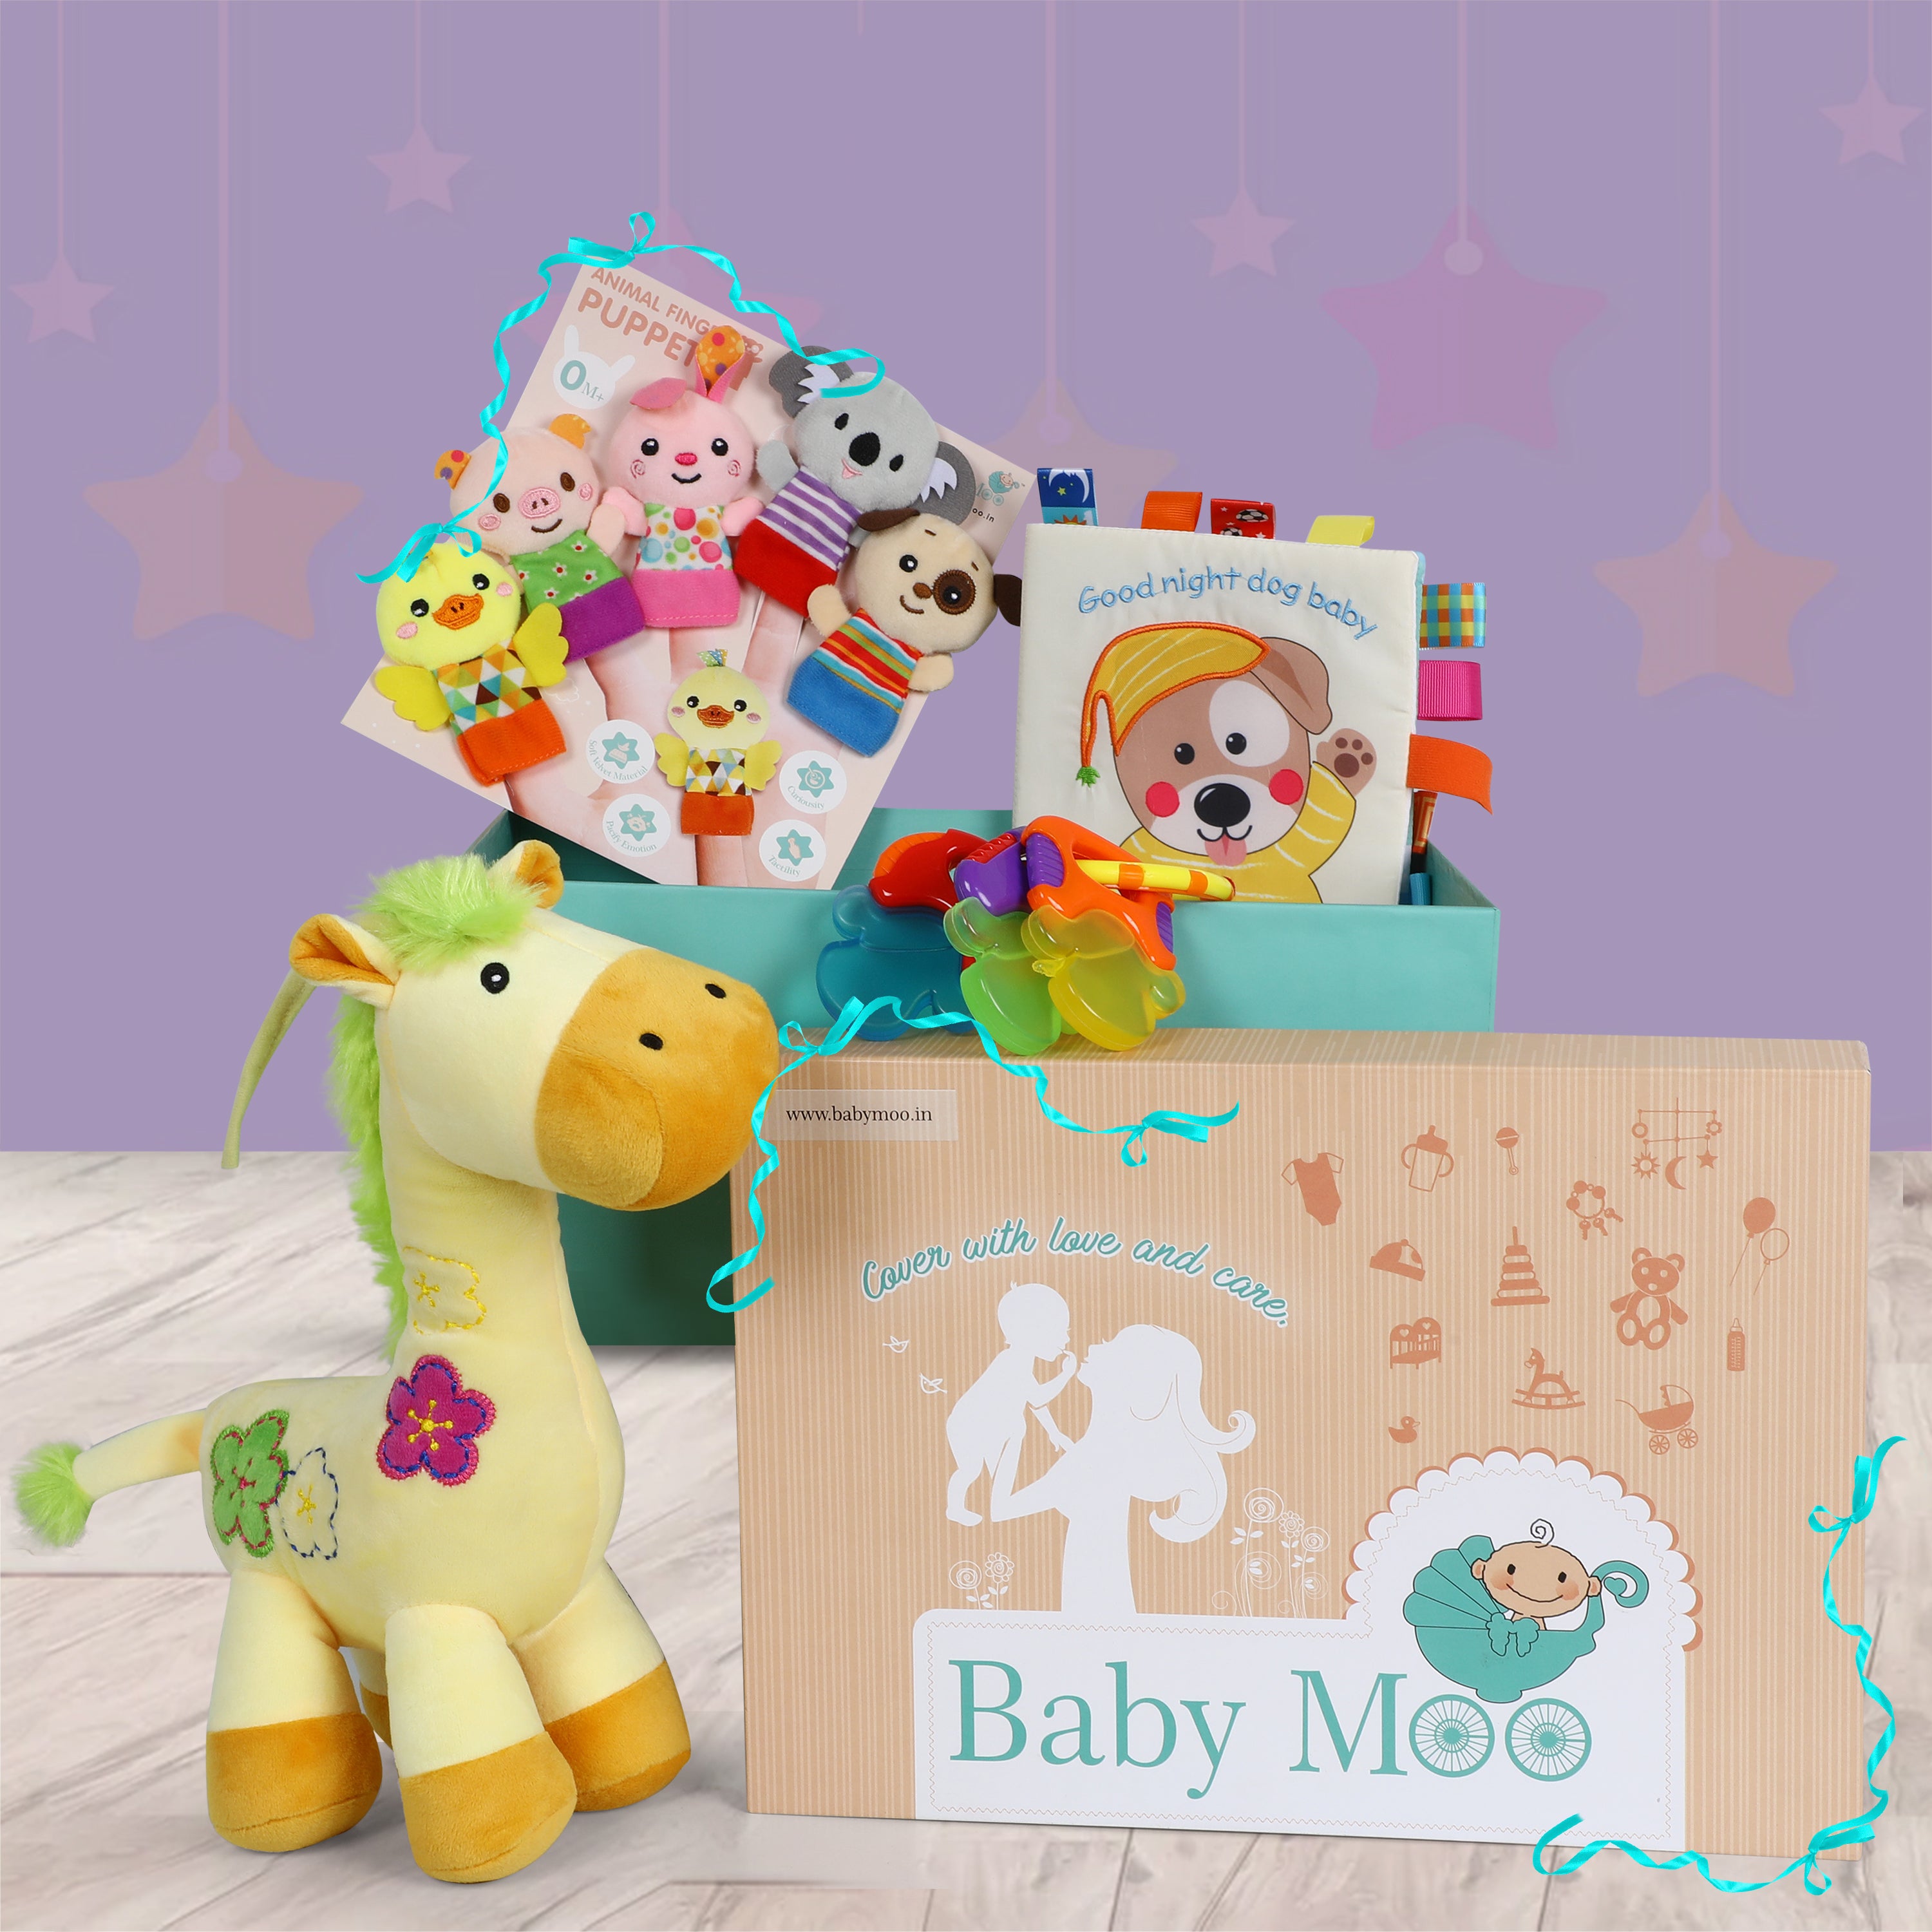 Gifting Play Kit With Activity Toys And Teethers 6M+